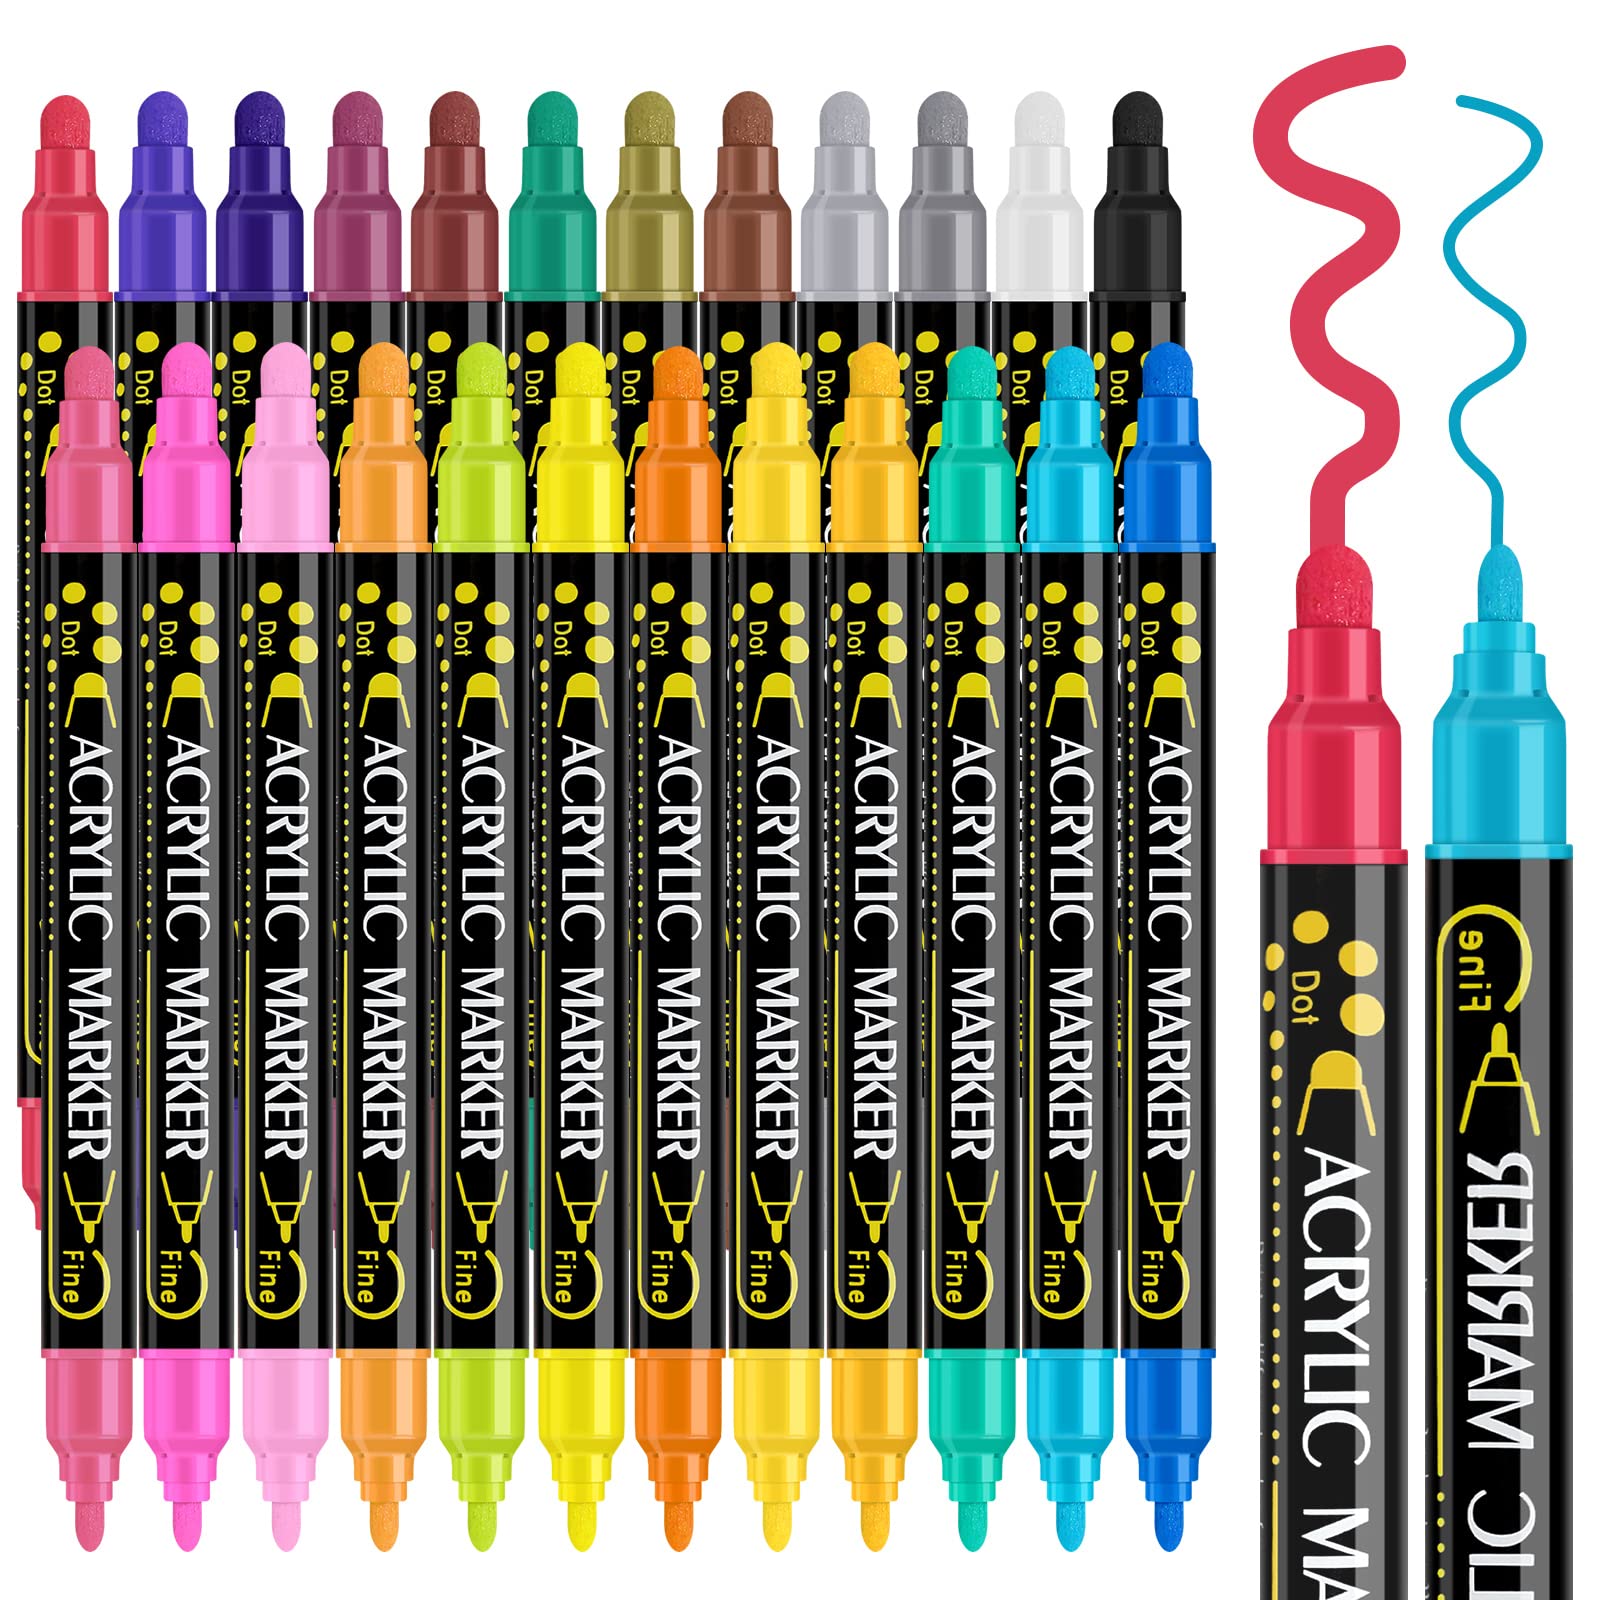  Acrylic Paint Markers Set - 12, Broad Tip-Tip Acrylic Paint  Pens For Rock Painting, Glass, Wood, Canvas And Fabric - Non-Toxic,  Permanent Acrylic Markers For Pumpkin Painting Kit